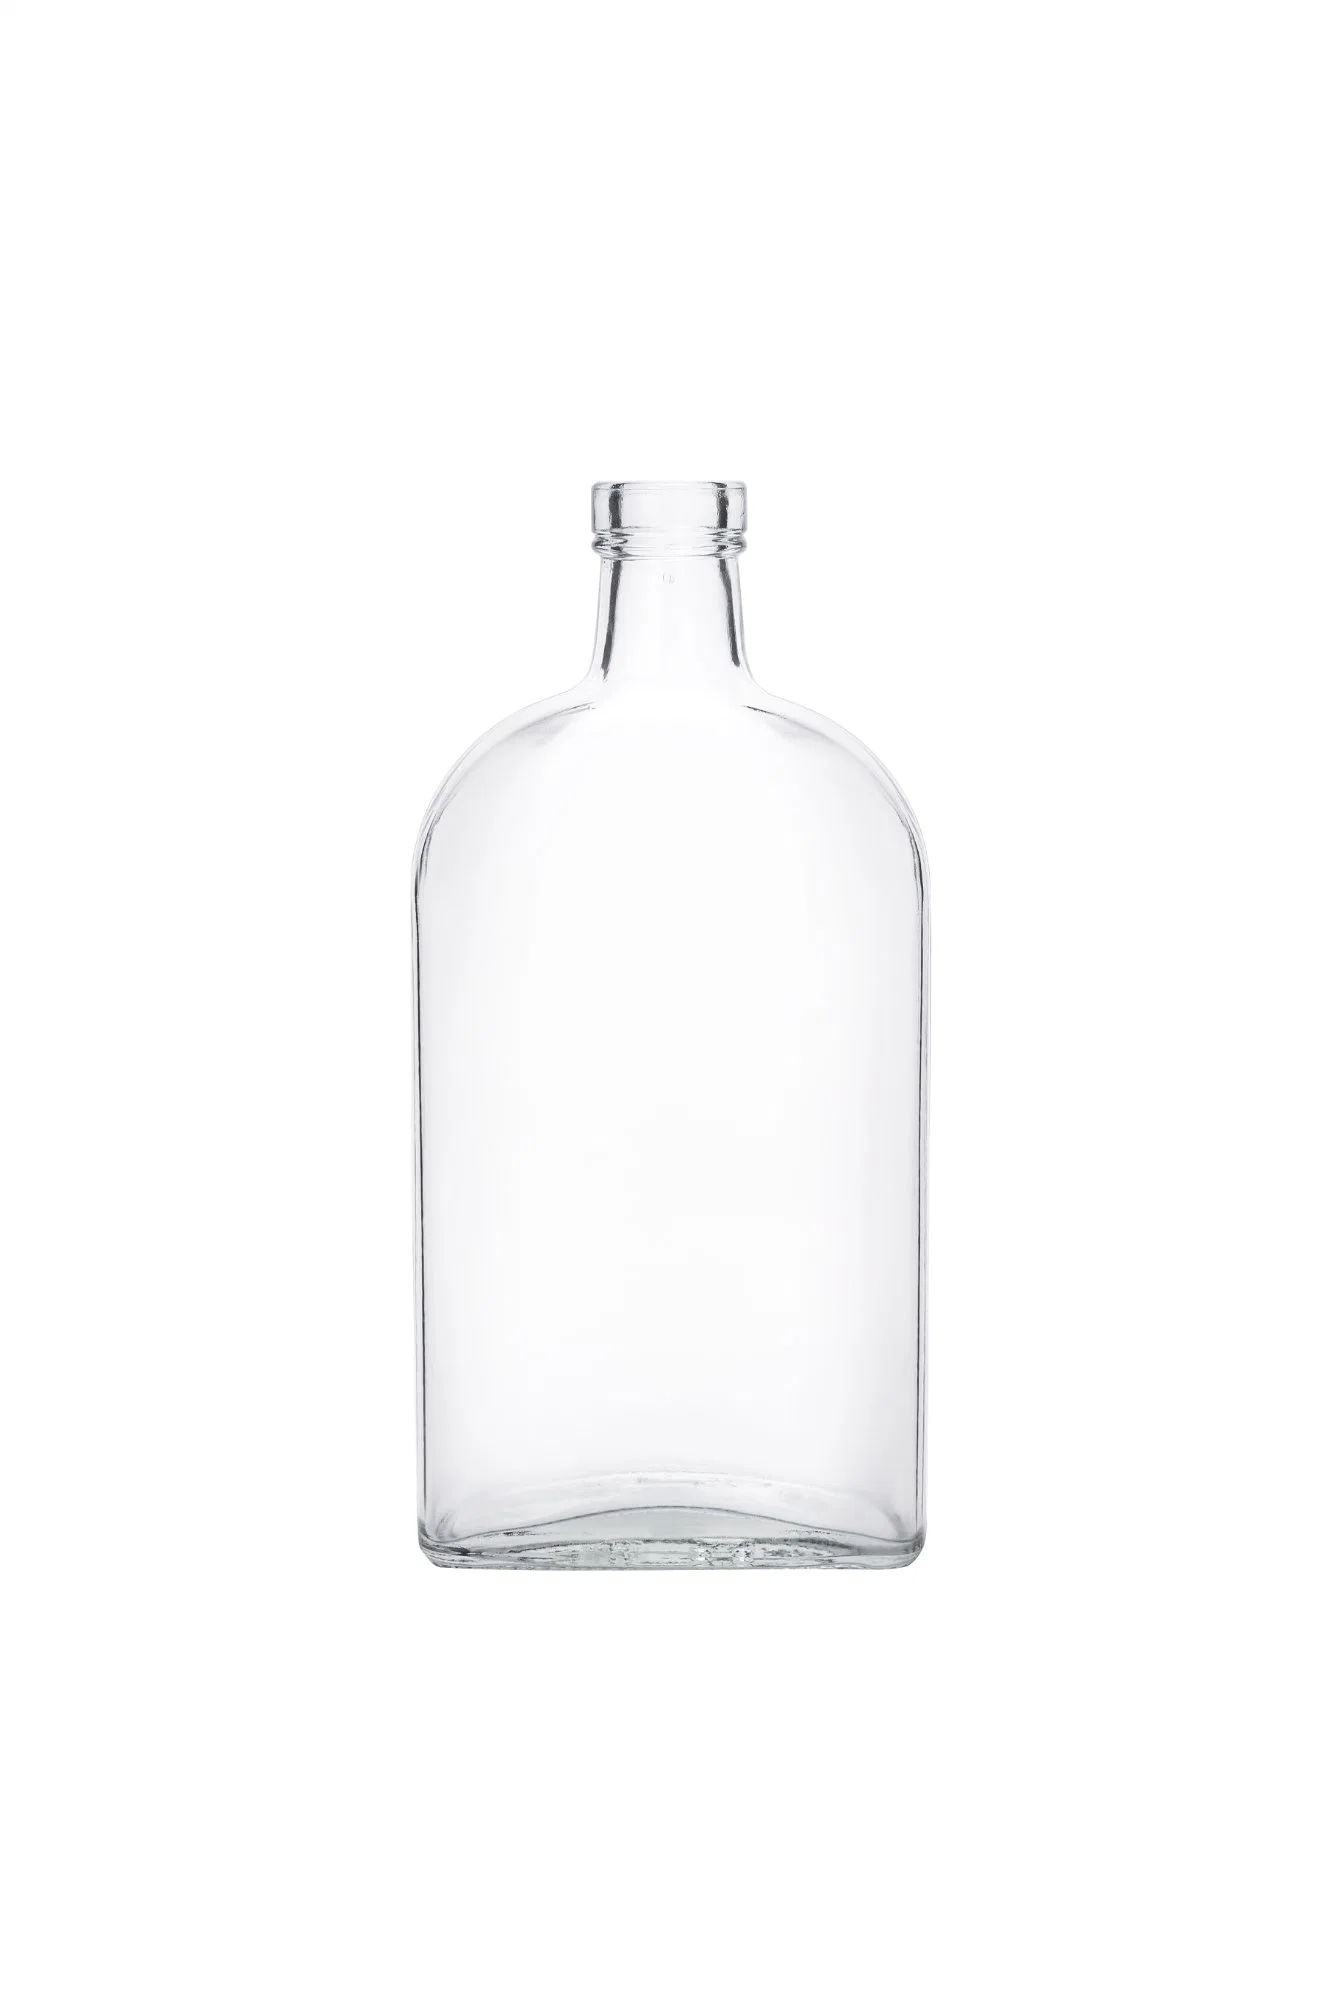 Factory Directly Price Full Sizes Clear Food Storage Jars Glass in Stocks